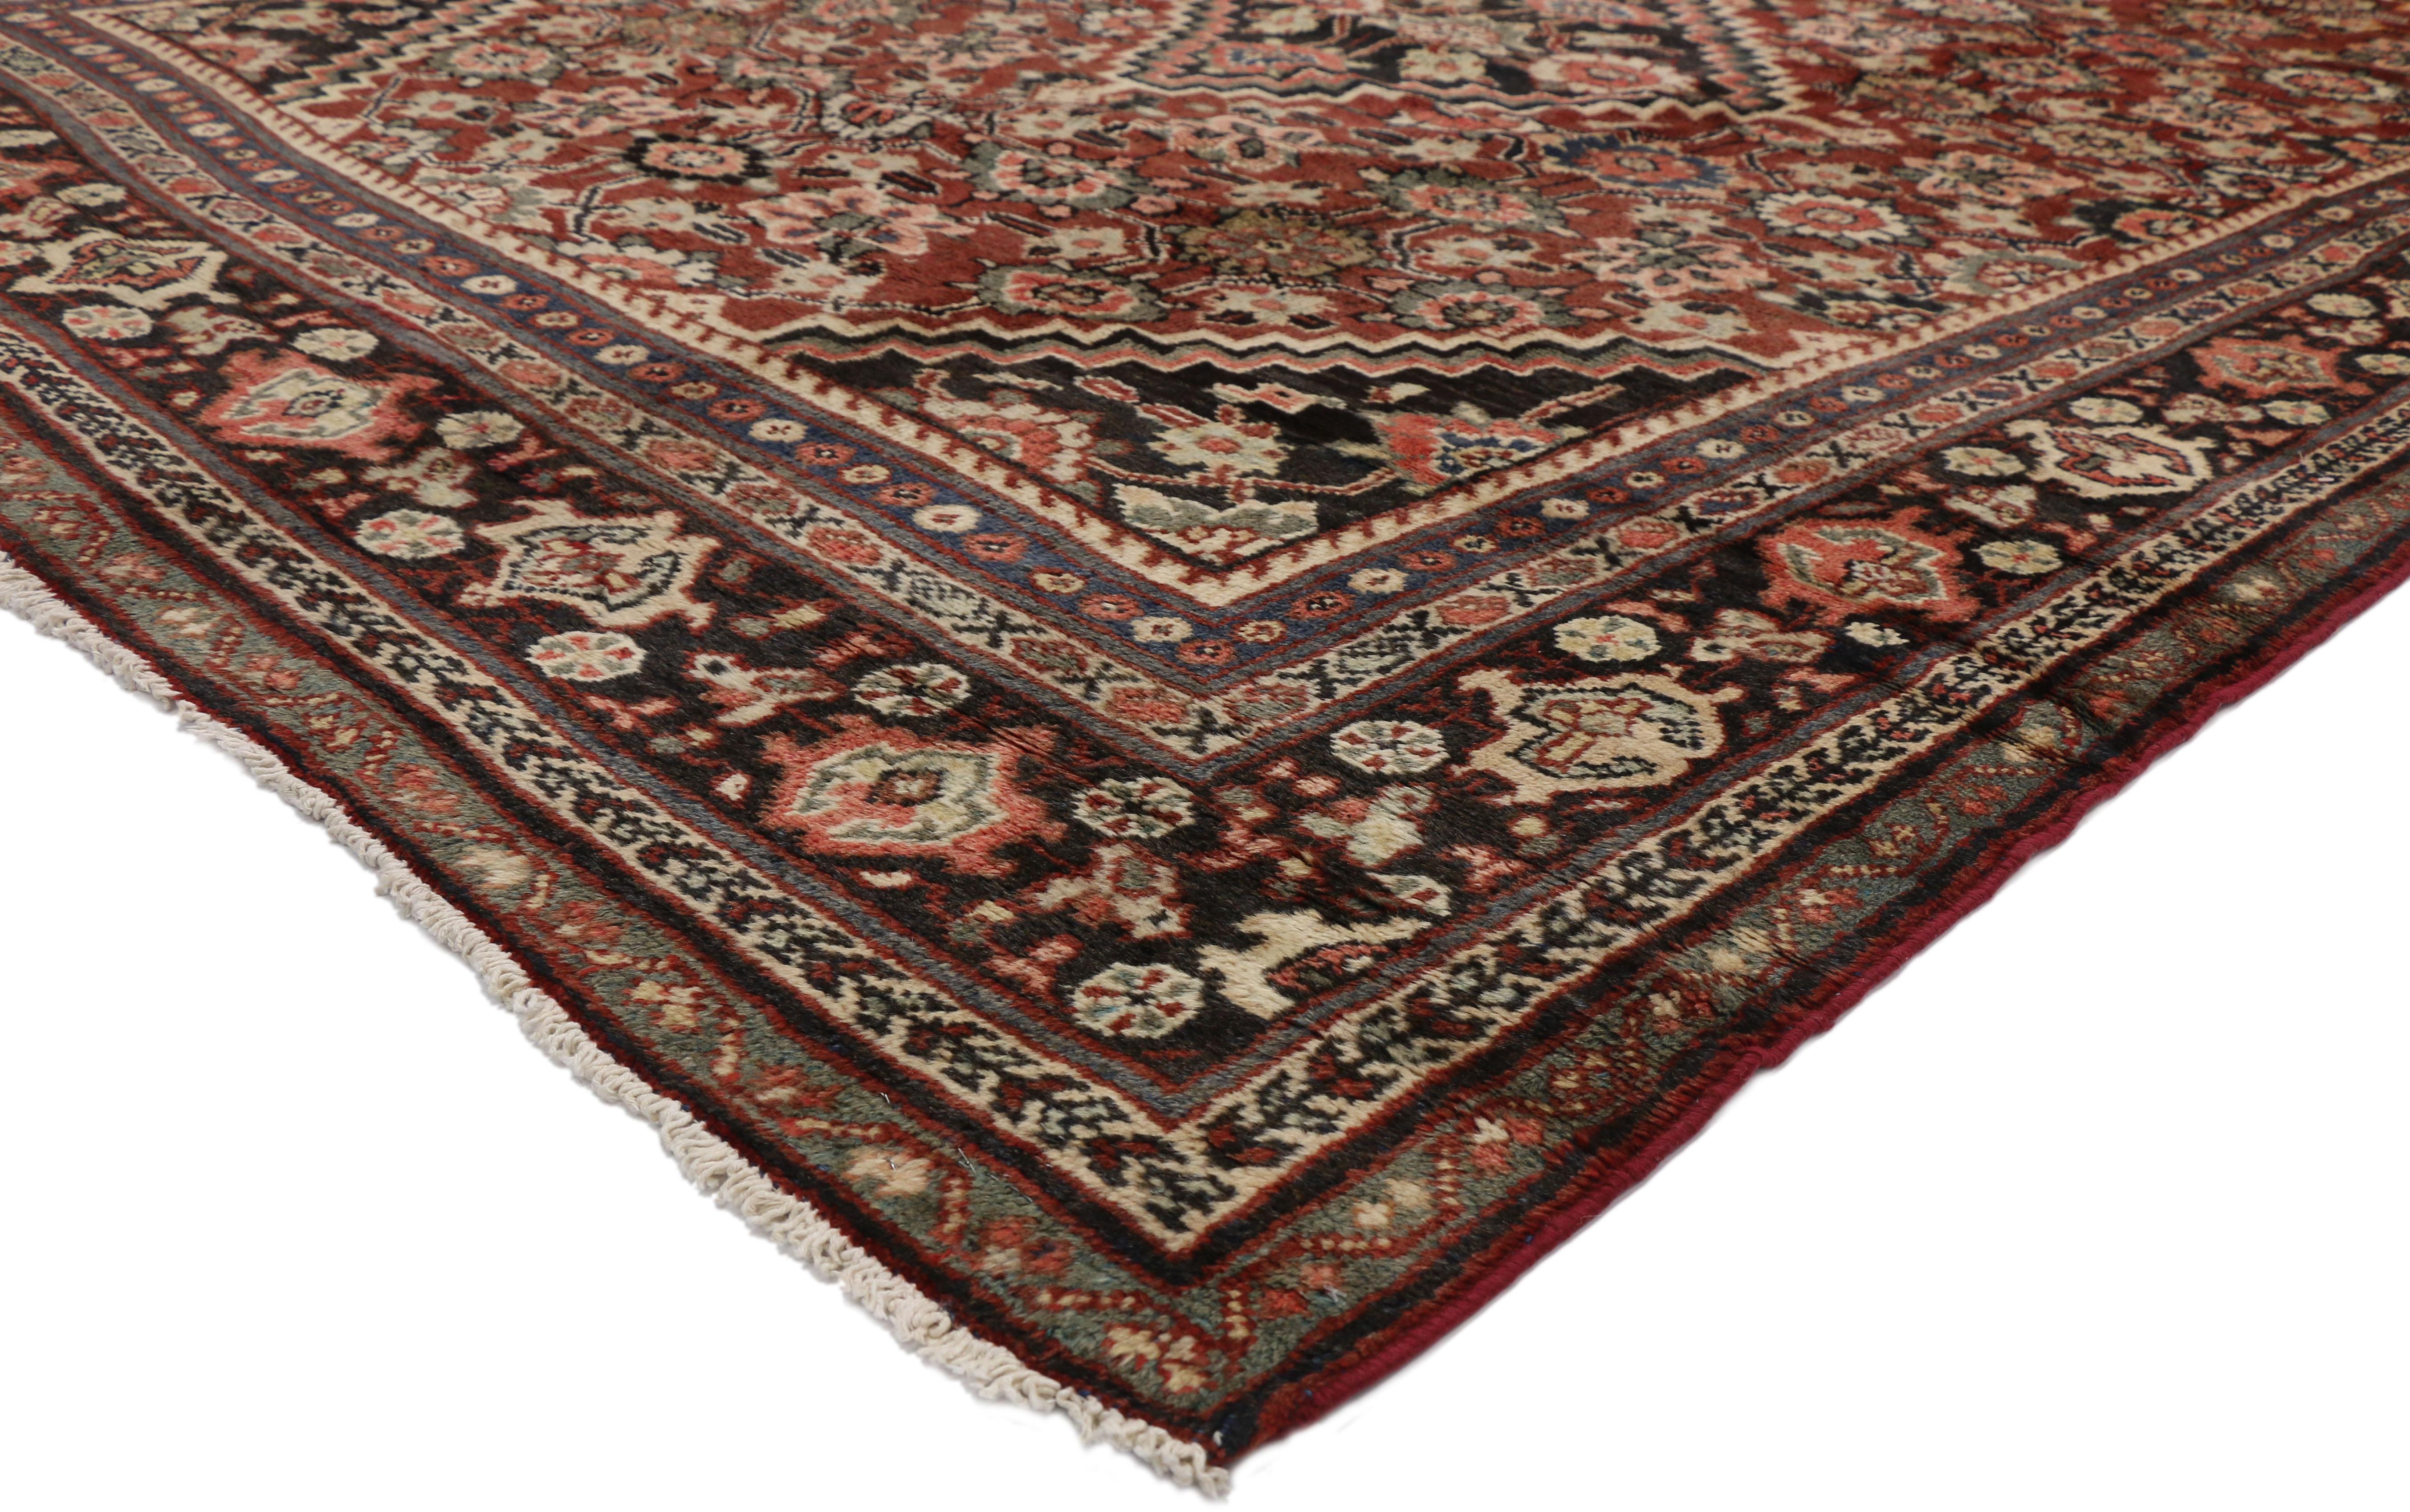 76318 Vintage Persian Mahal Rug with English Traditional Style 09'01 x 12'02. With its timeless design and architectural elements of naturalistic forms, this hand knotted wool vintage Persian Mahal rug beautifully embodies a warm Arts and Crafts